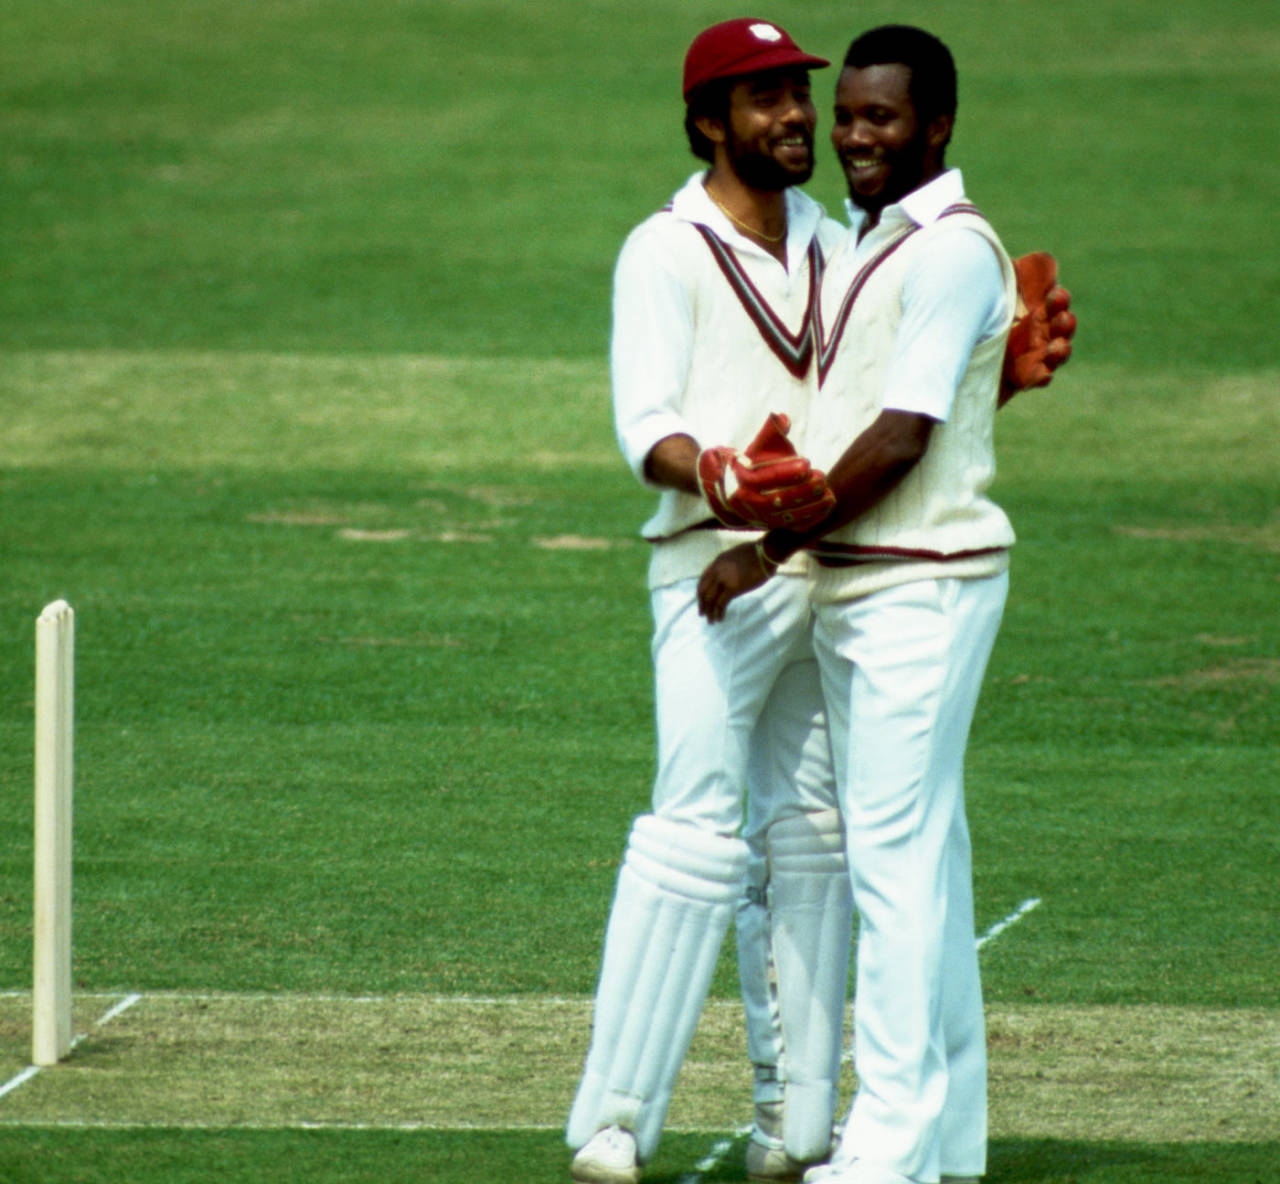 Dujon and Marshall, along with Richards, bowed out of Test cricket together in 1991&nbsp;&nbsp;&bull;&nbsp;&nbsp;Getty Images